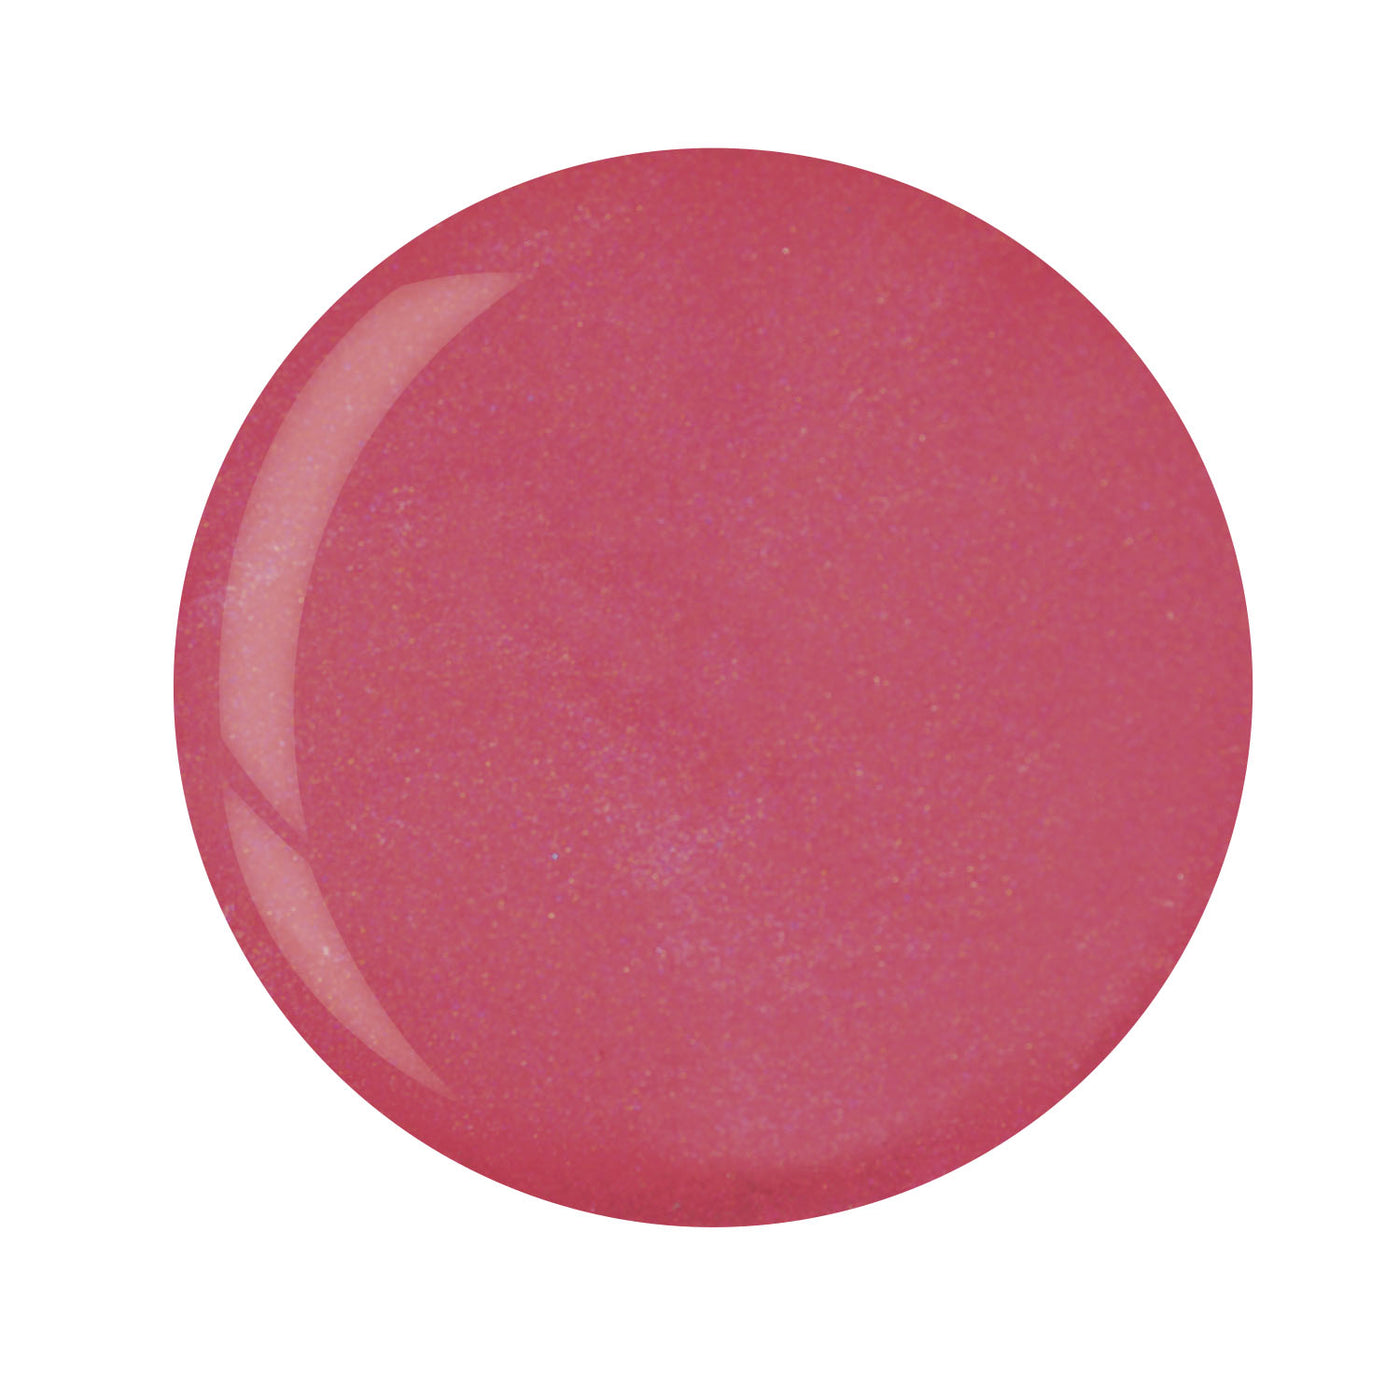 CP Dipping Powder14g - 5520-5 Rose W/ Shimmer